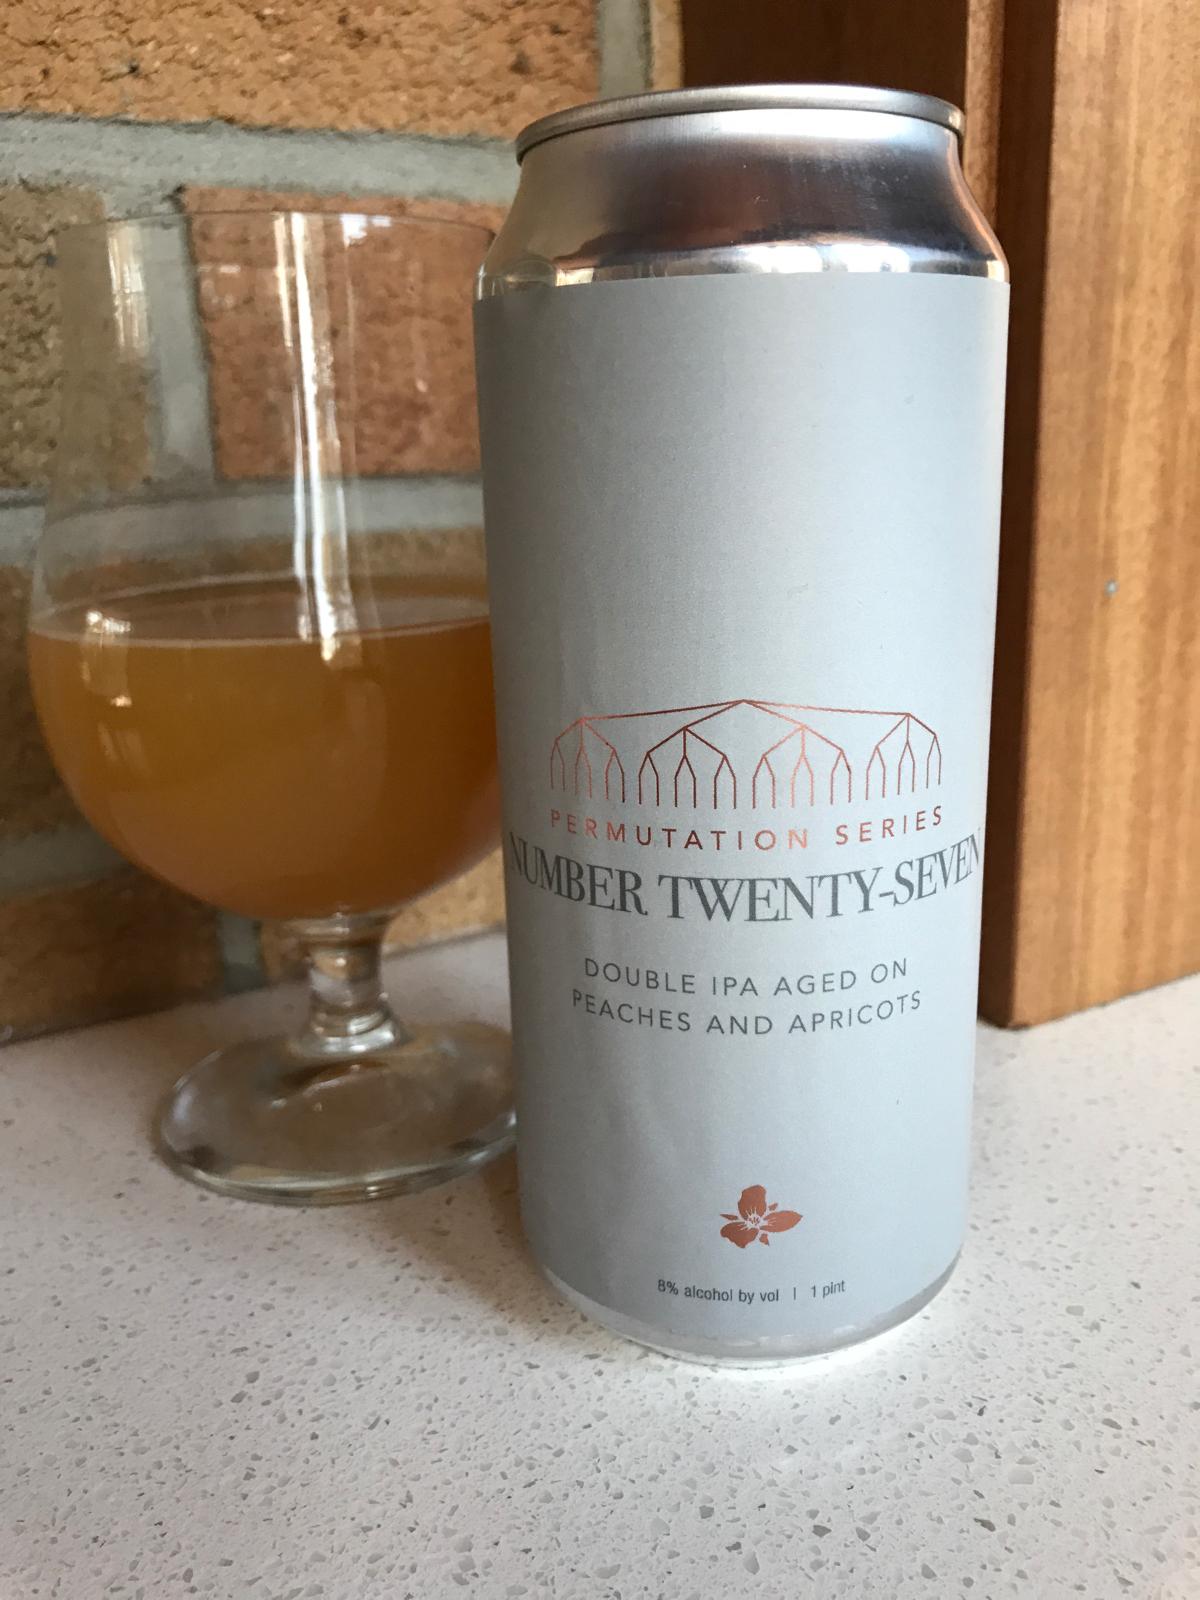 Permutation Series #27: Double IPA Aged on Peaches and Apricots